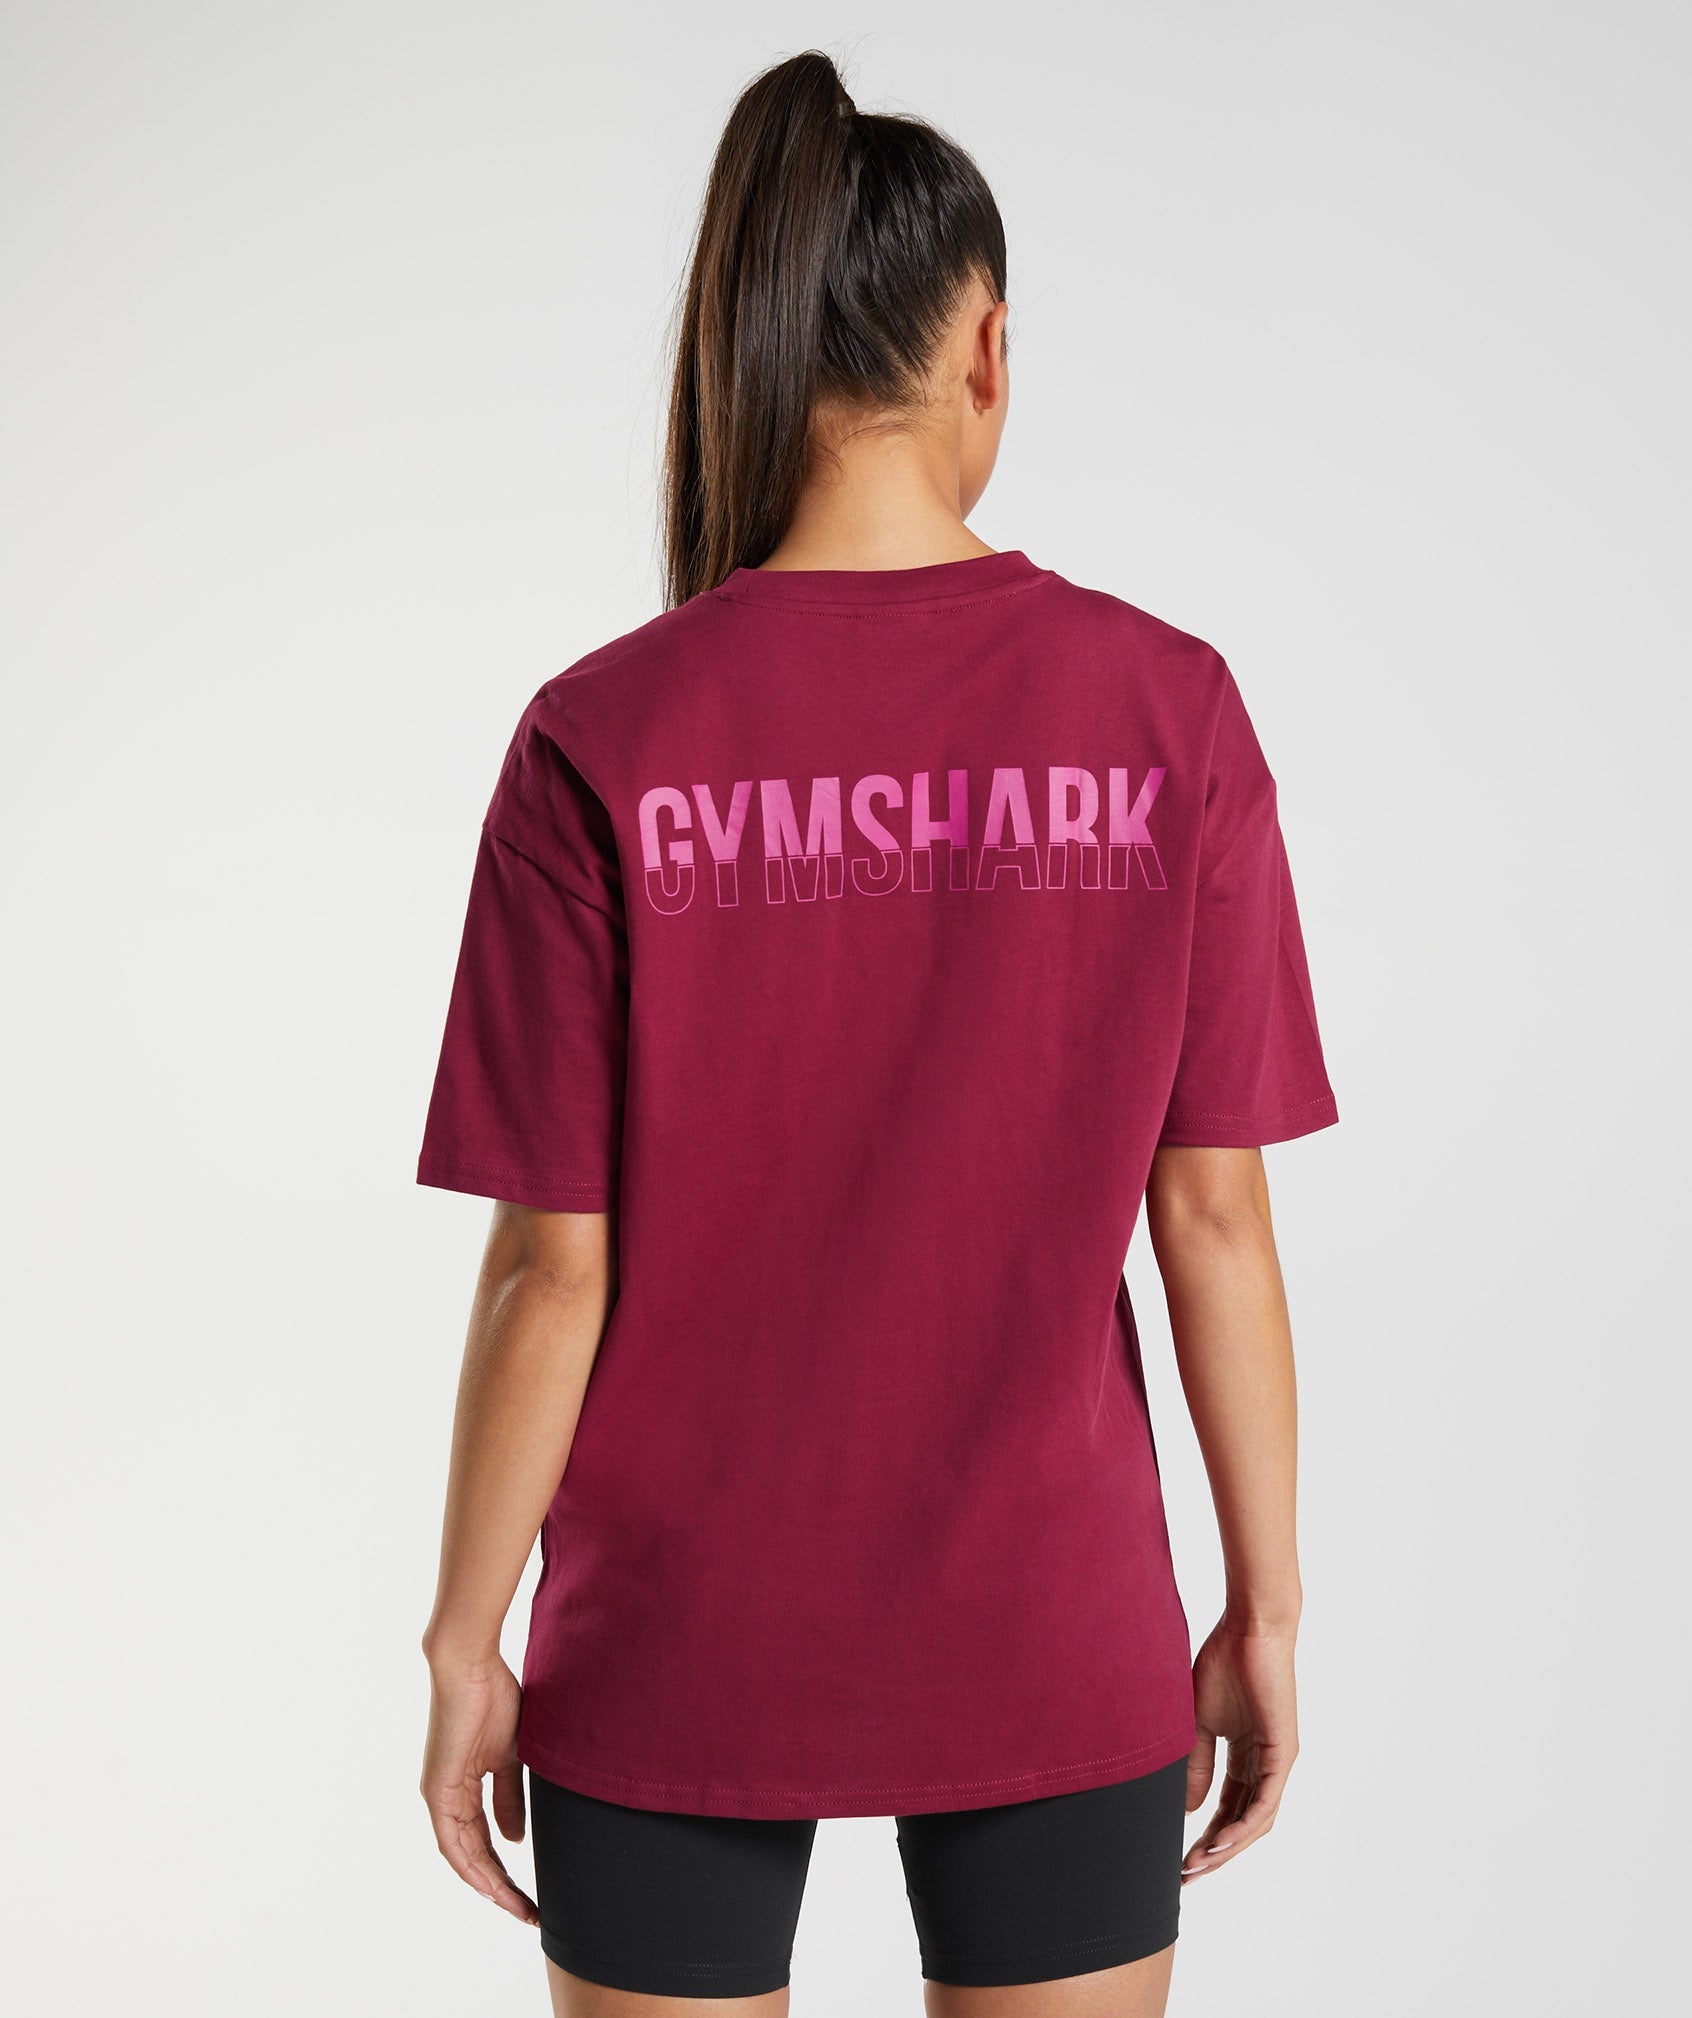 GYMSHARK Apollo coral pink t-shirt UK size S